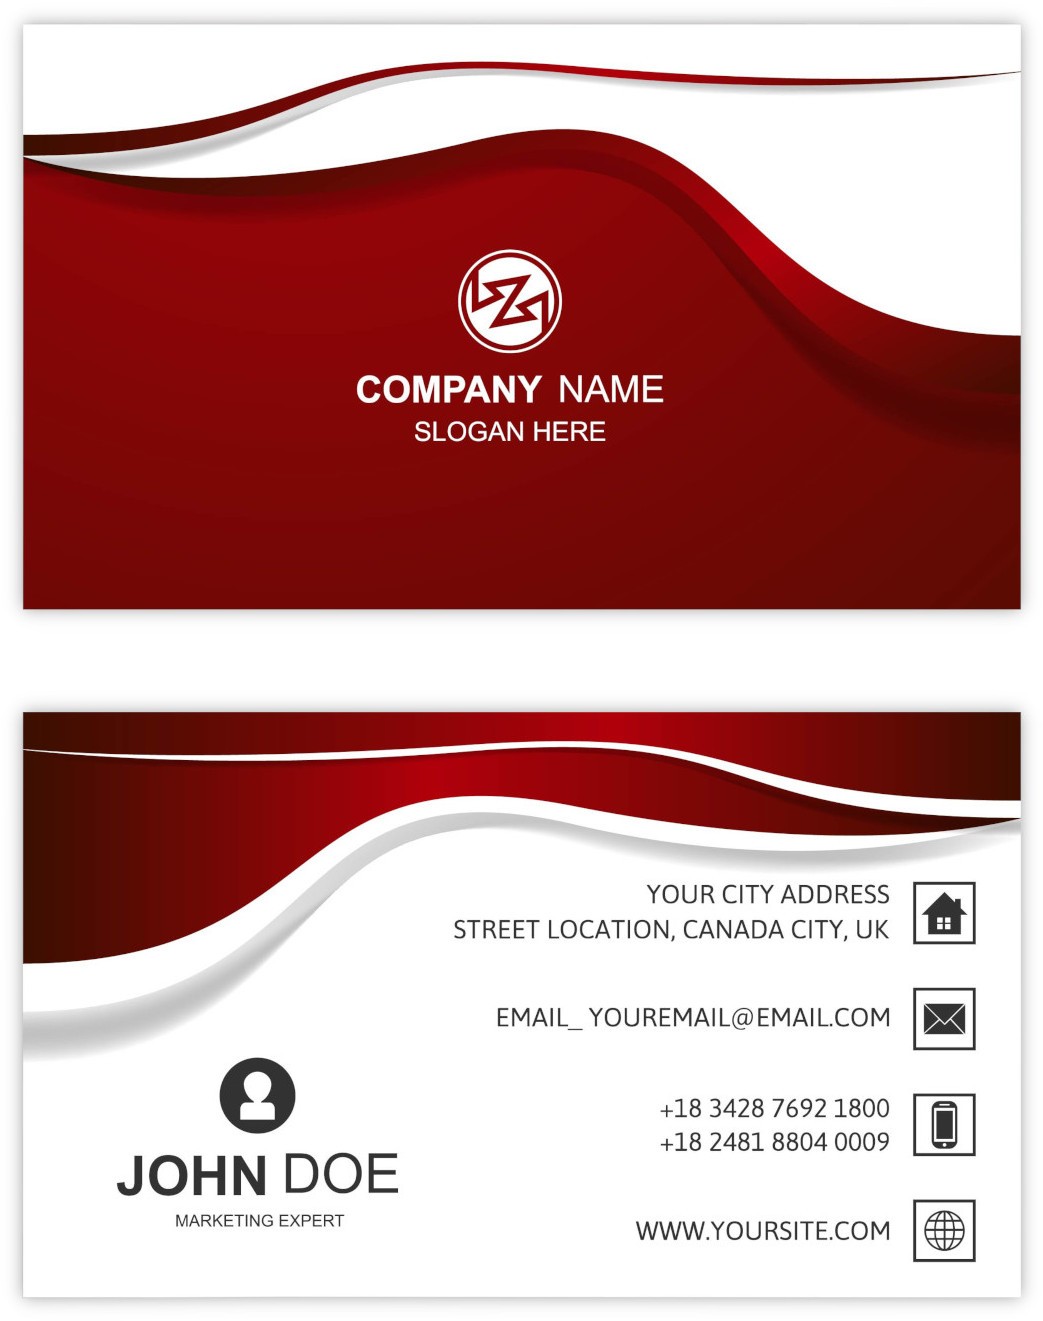 Printer augmented reality - Business cards